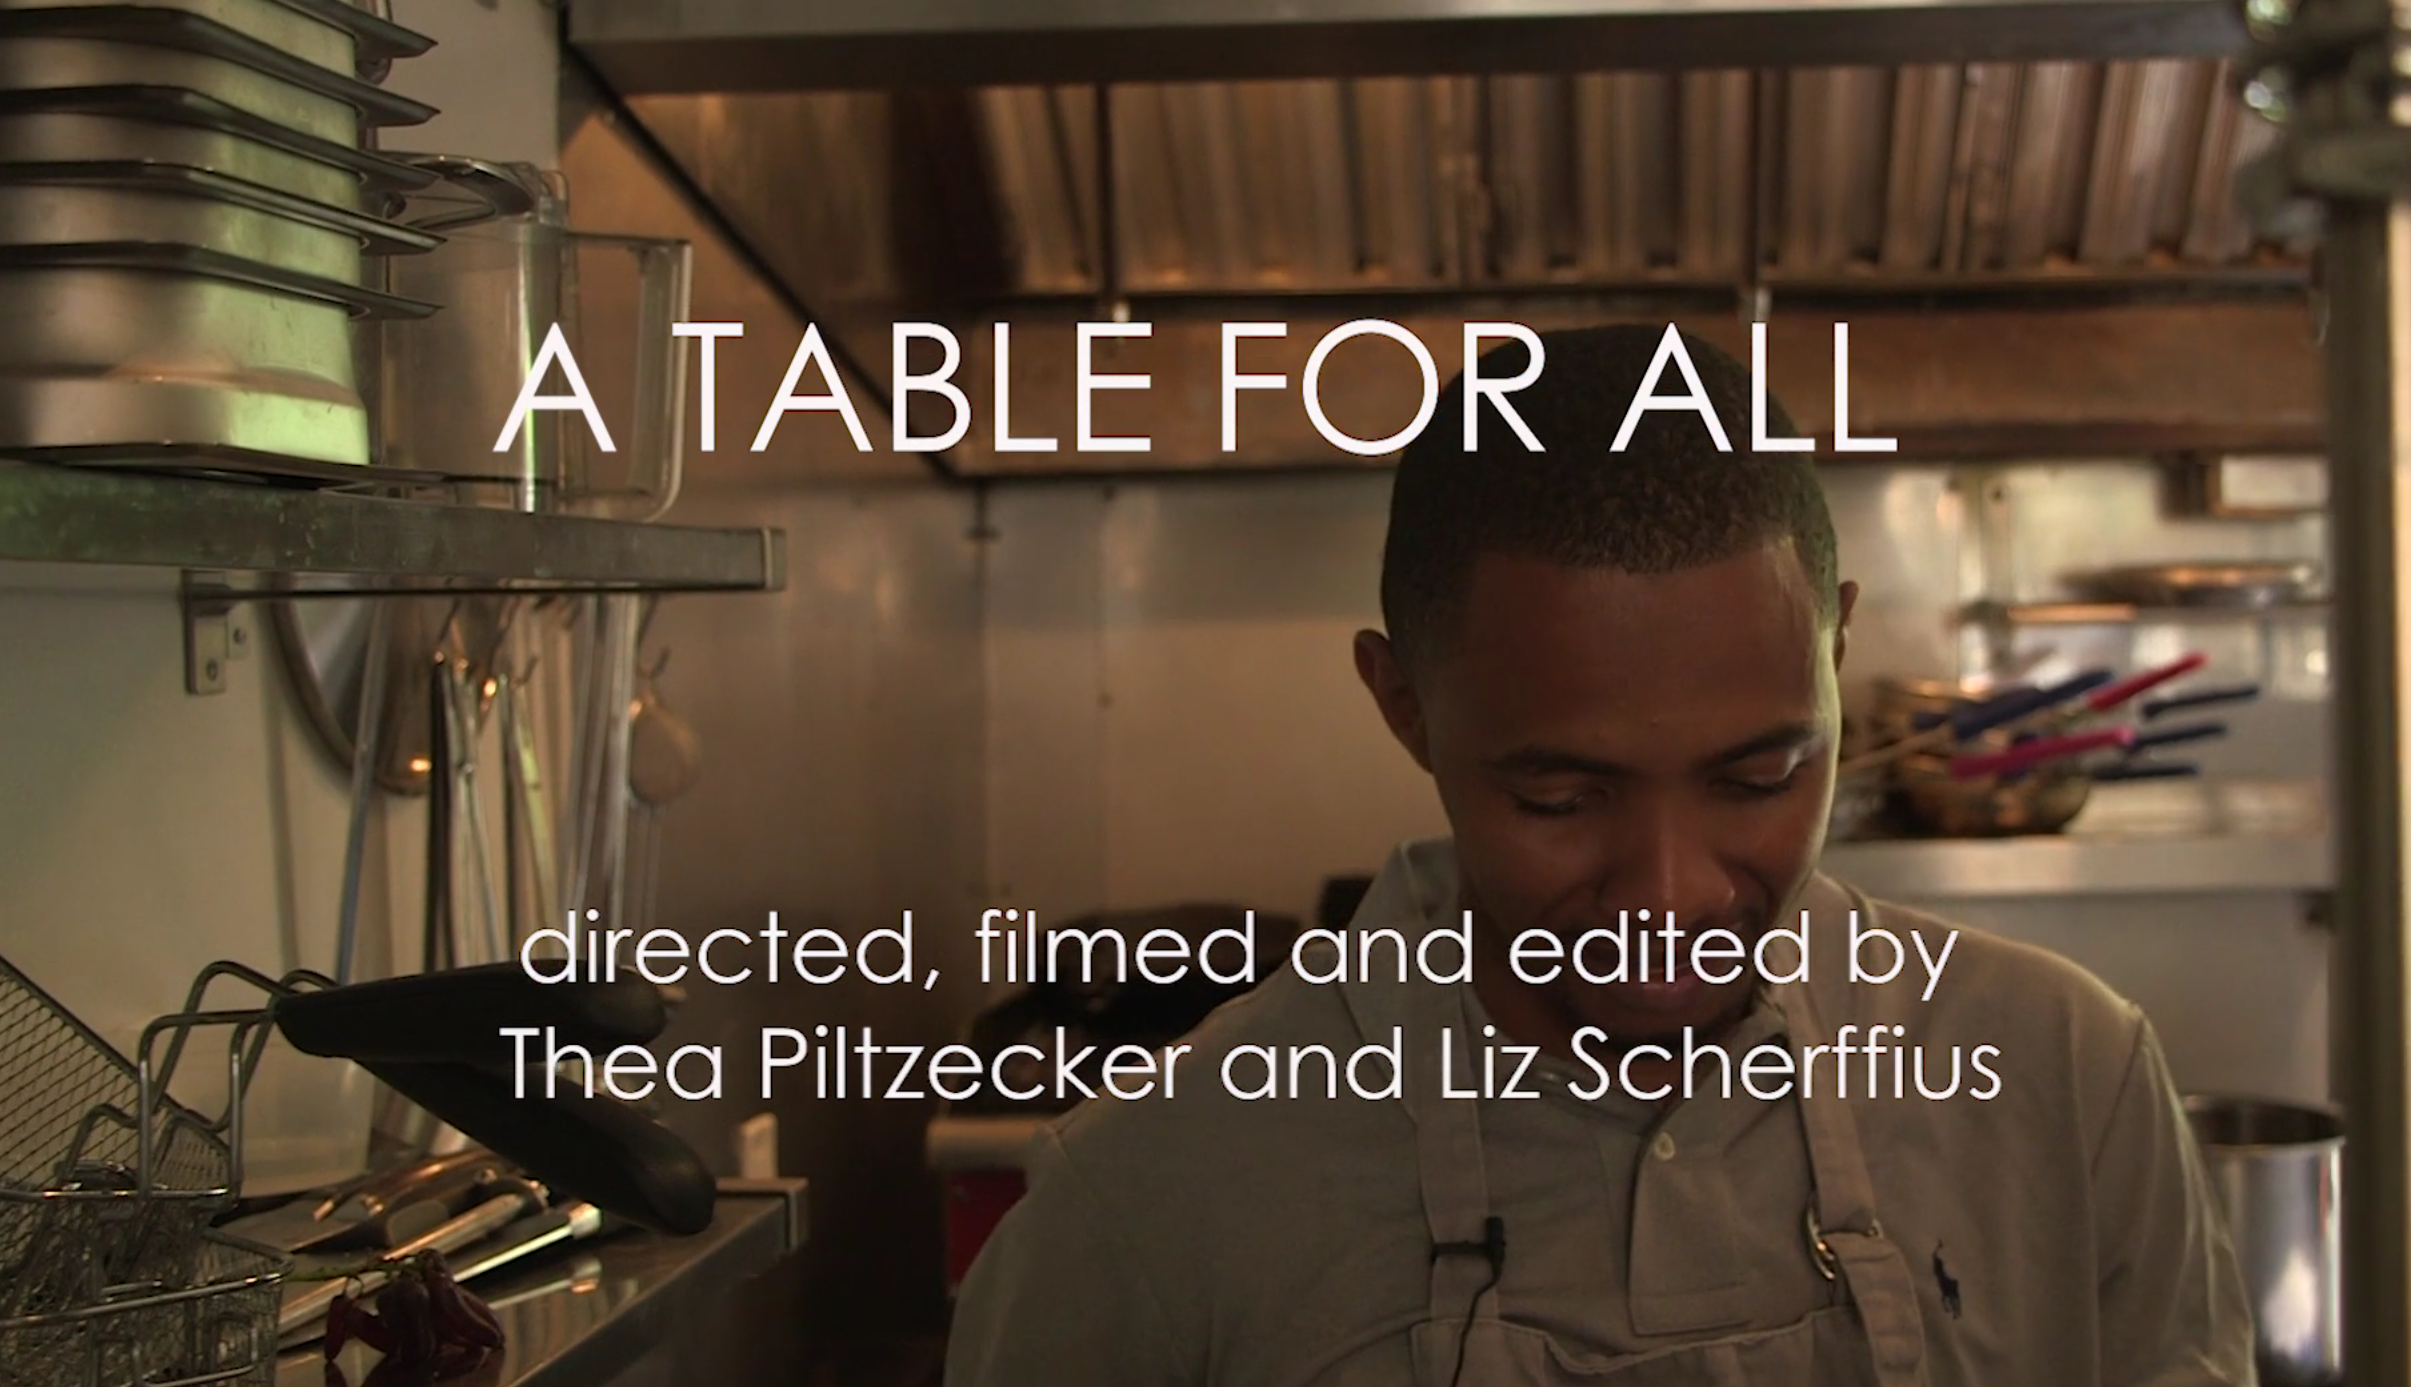 A Table for All. Directed, filmed, and edited by Thea Piltzecker and Liz Scherffius. Image by Thea Piltzecker and Liz Scherffius. New York, 2018.